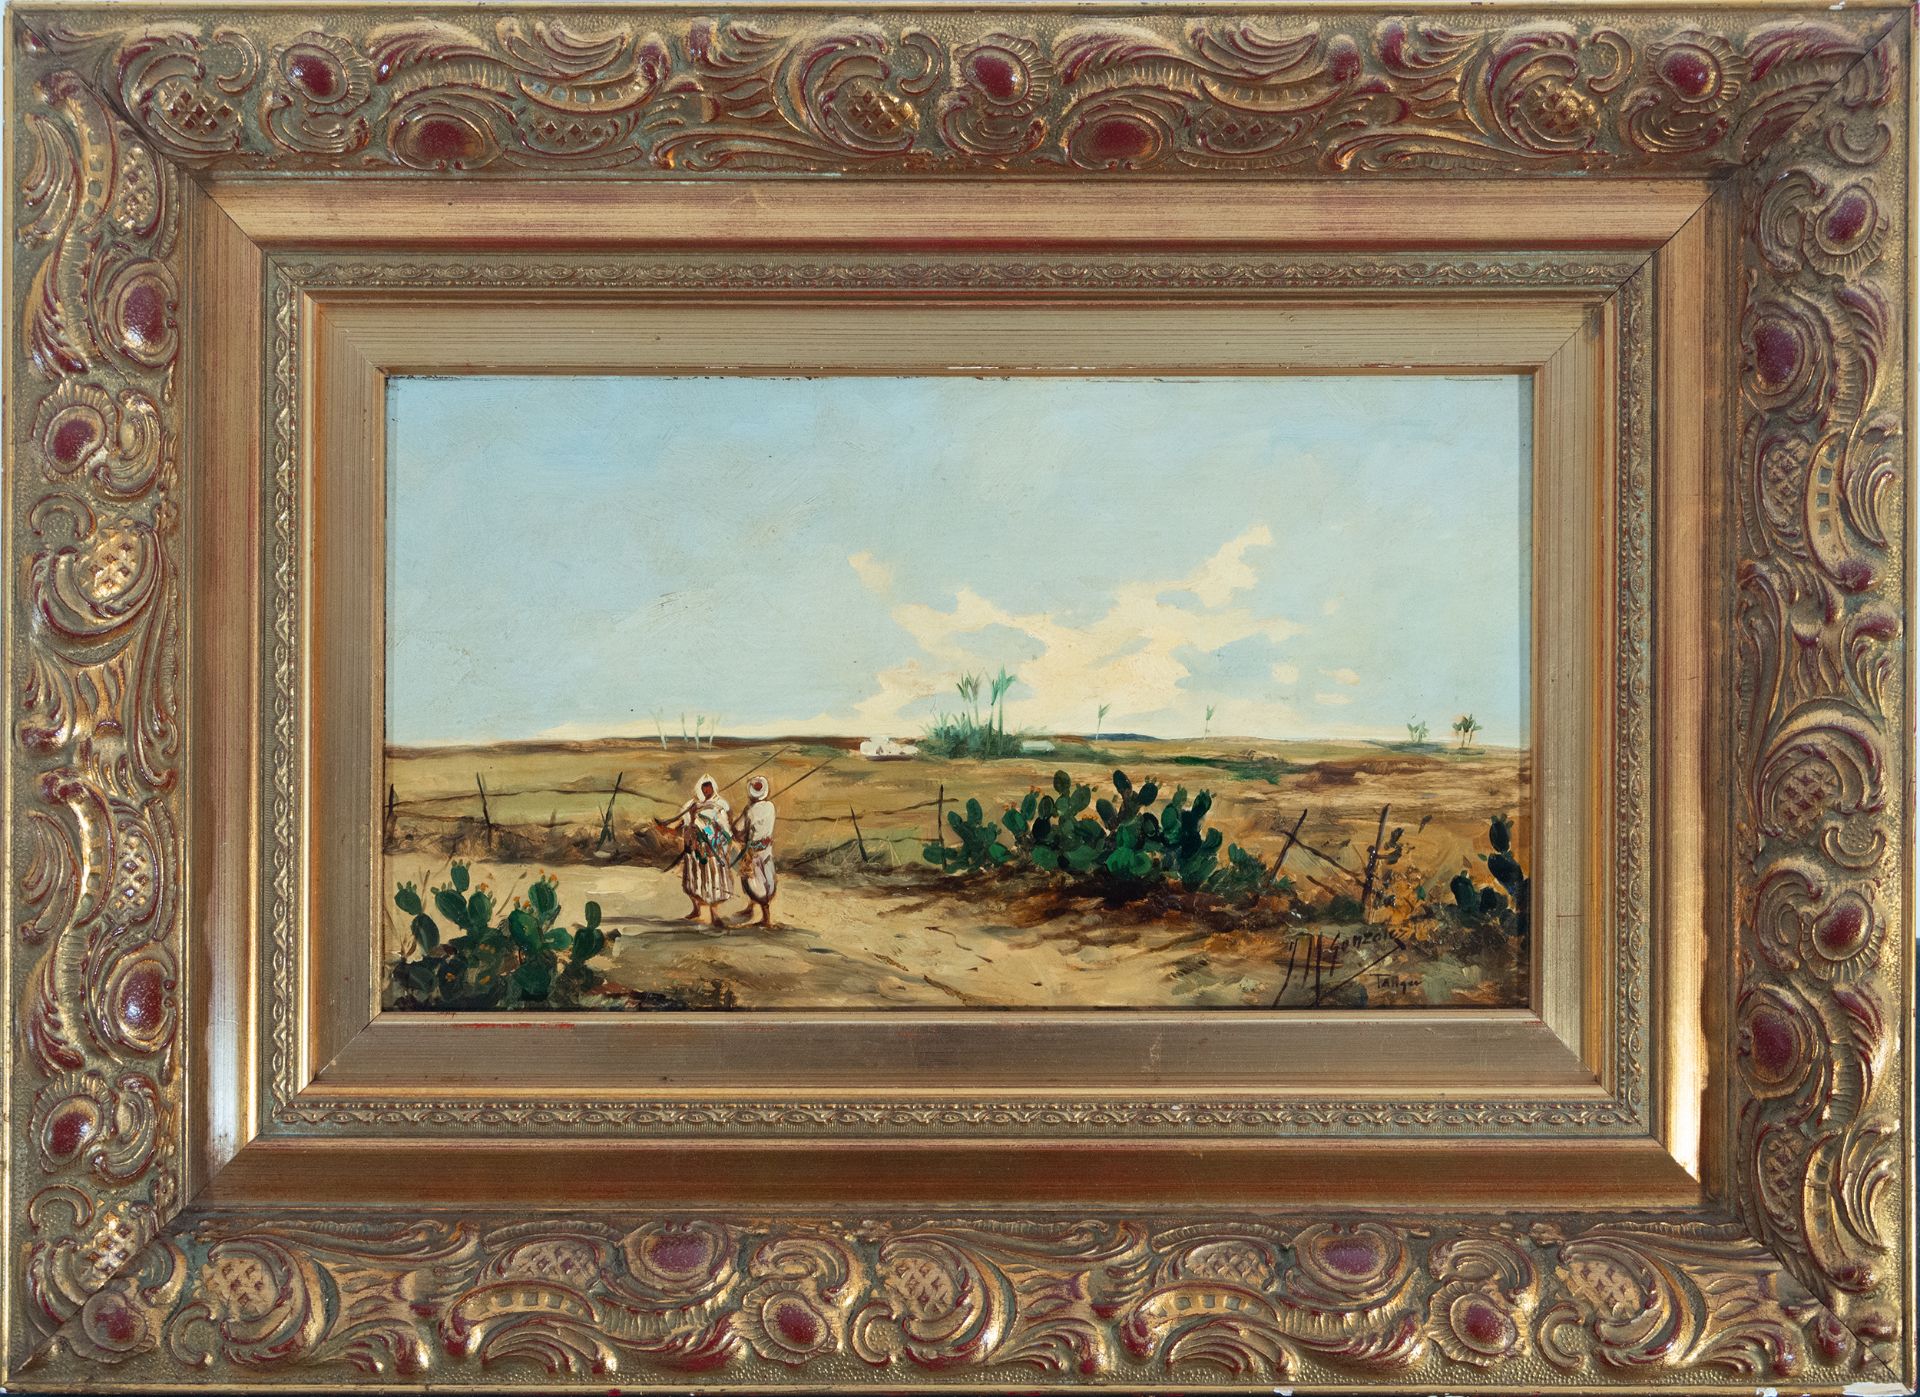 Pair of Orientalist Landscapes, M. González, Tangier, early 20th century - Image 6 of 10